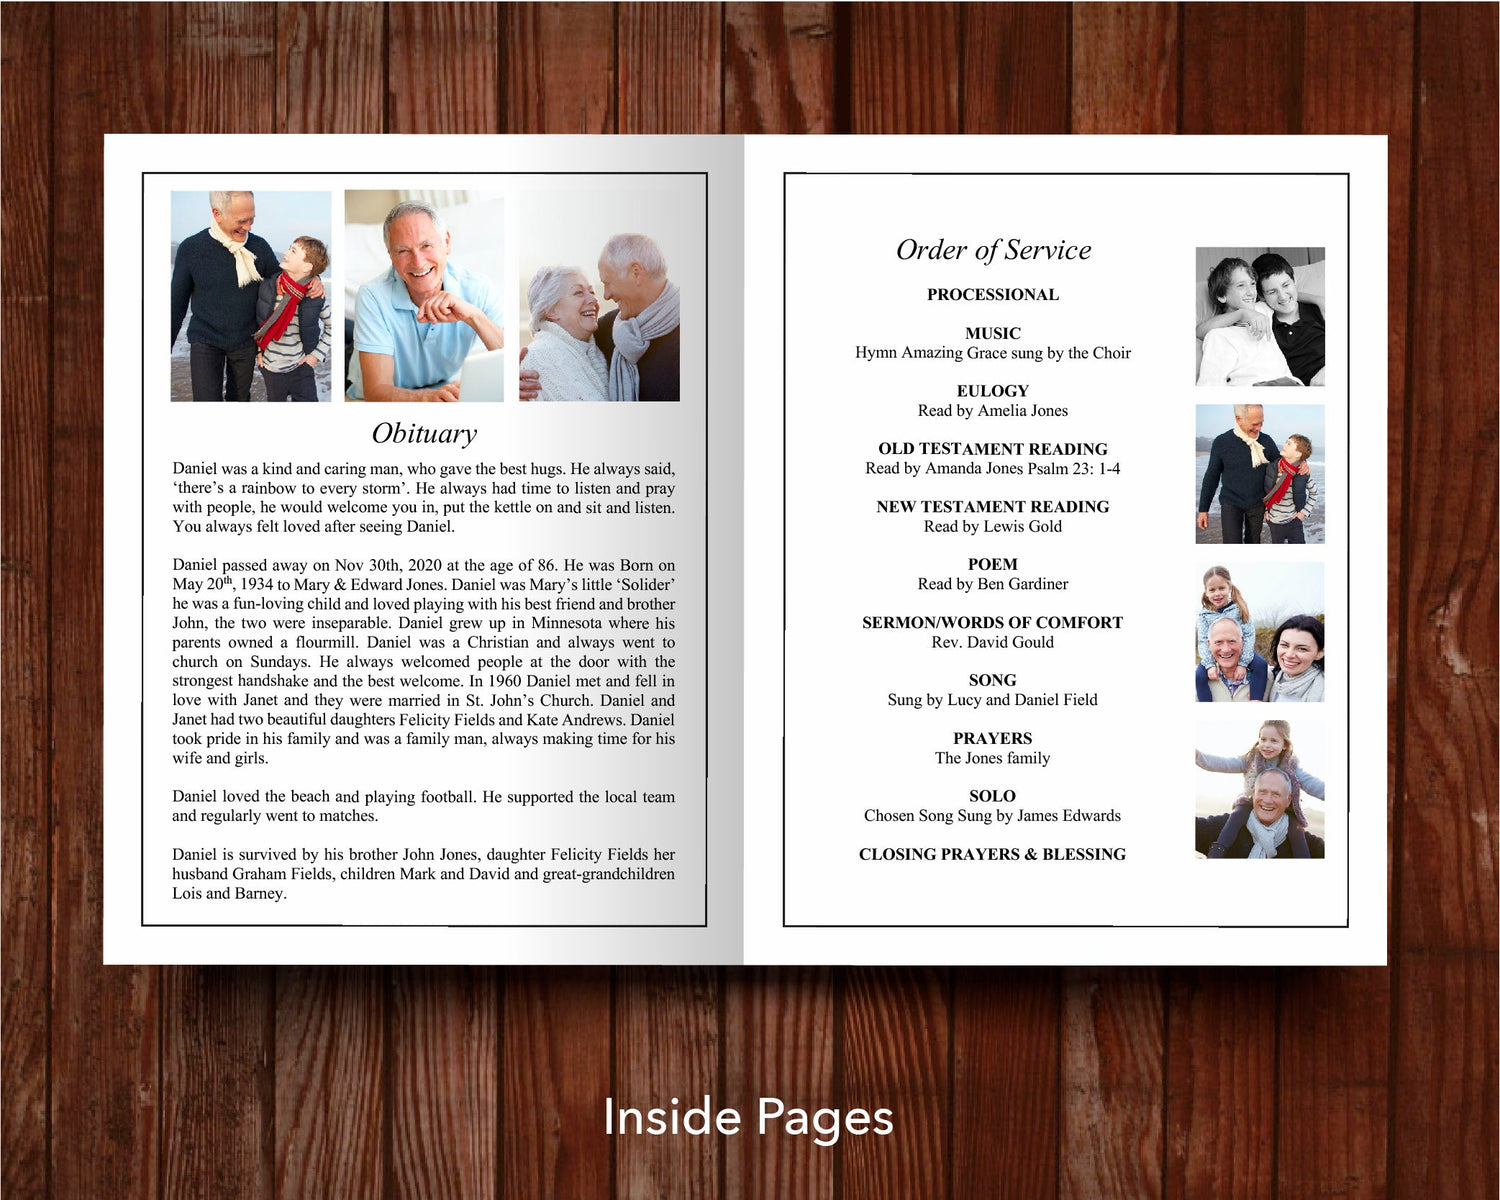 4 Page Catholic Funeral Program Template (11 x 17 inches)